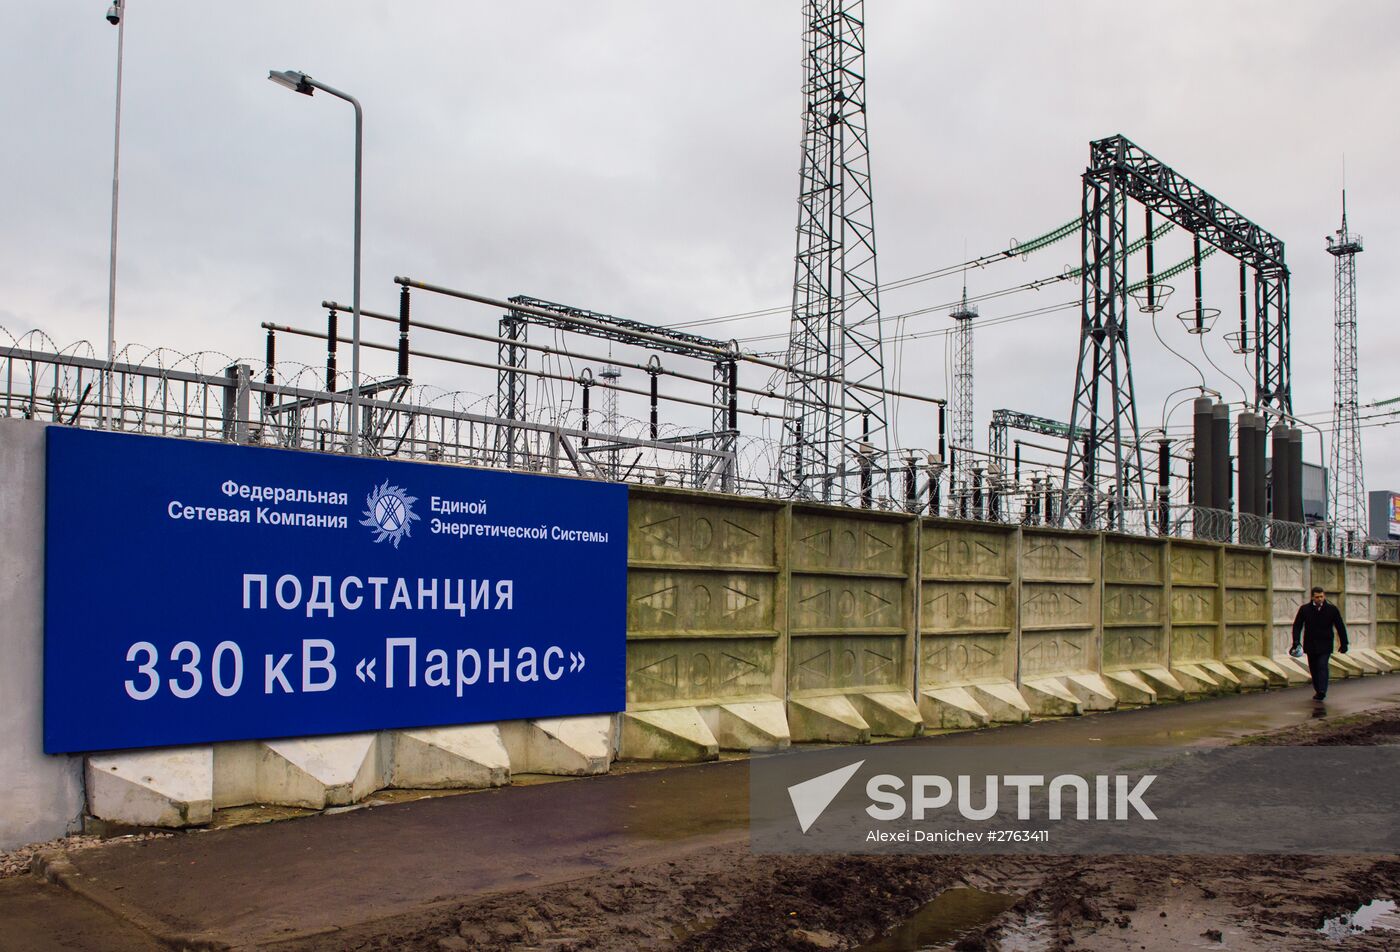 Opening ceremony of FGC UES's branch's new substation in St.Petersburg